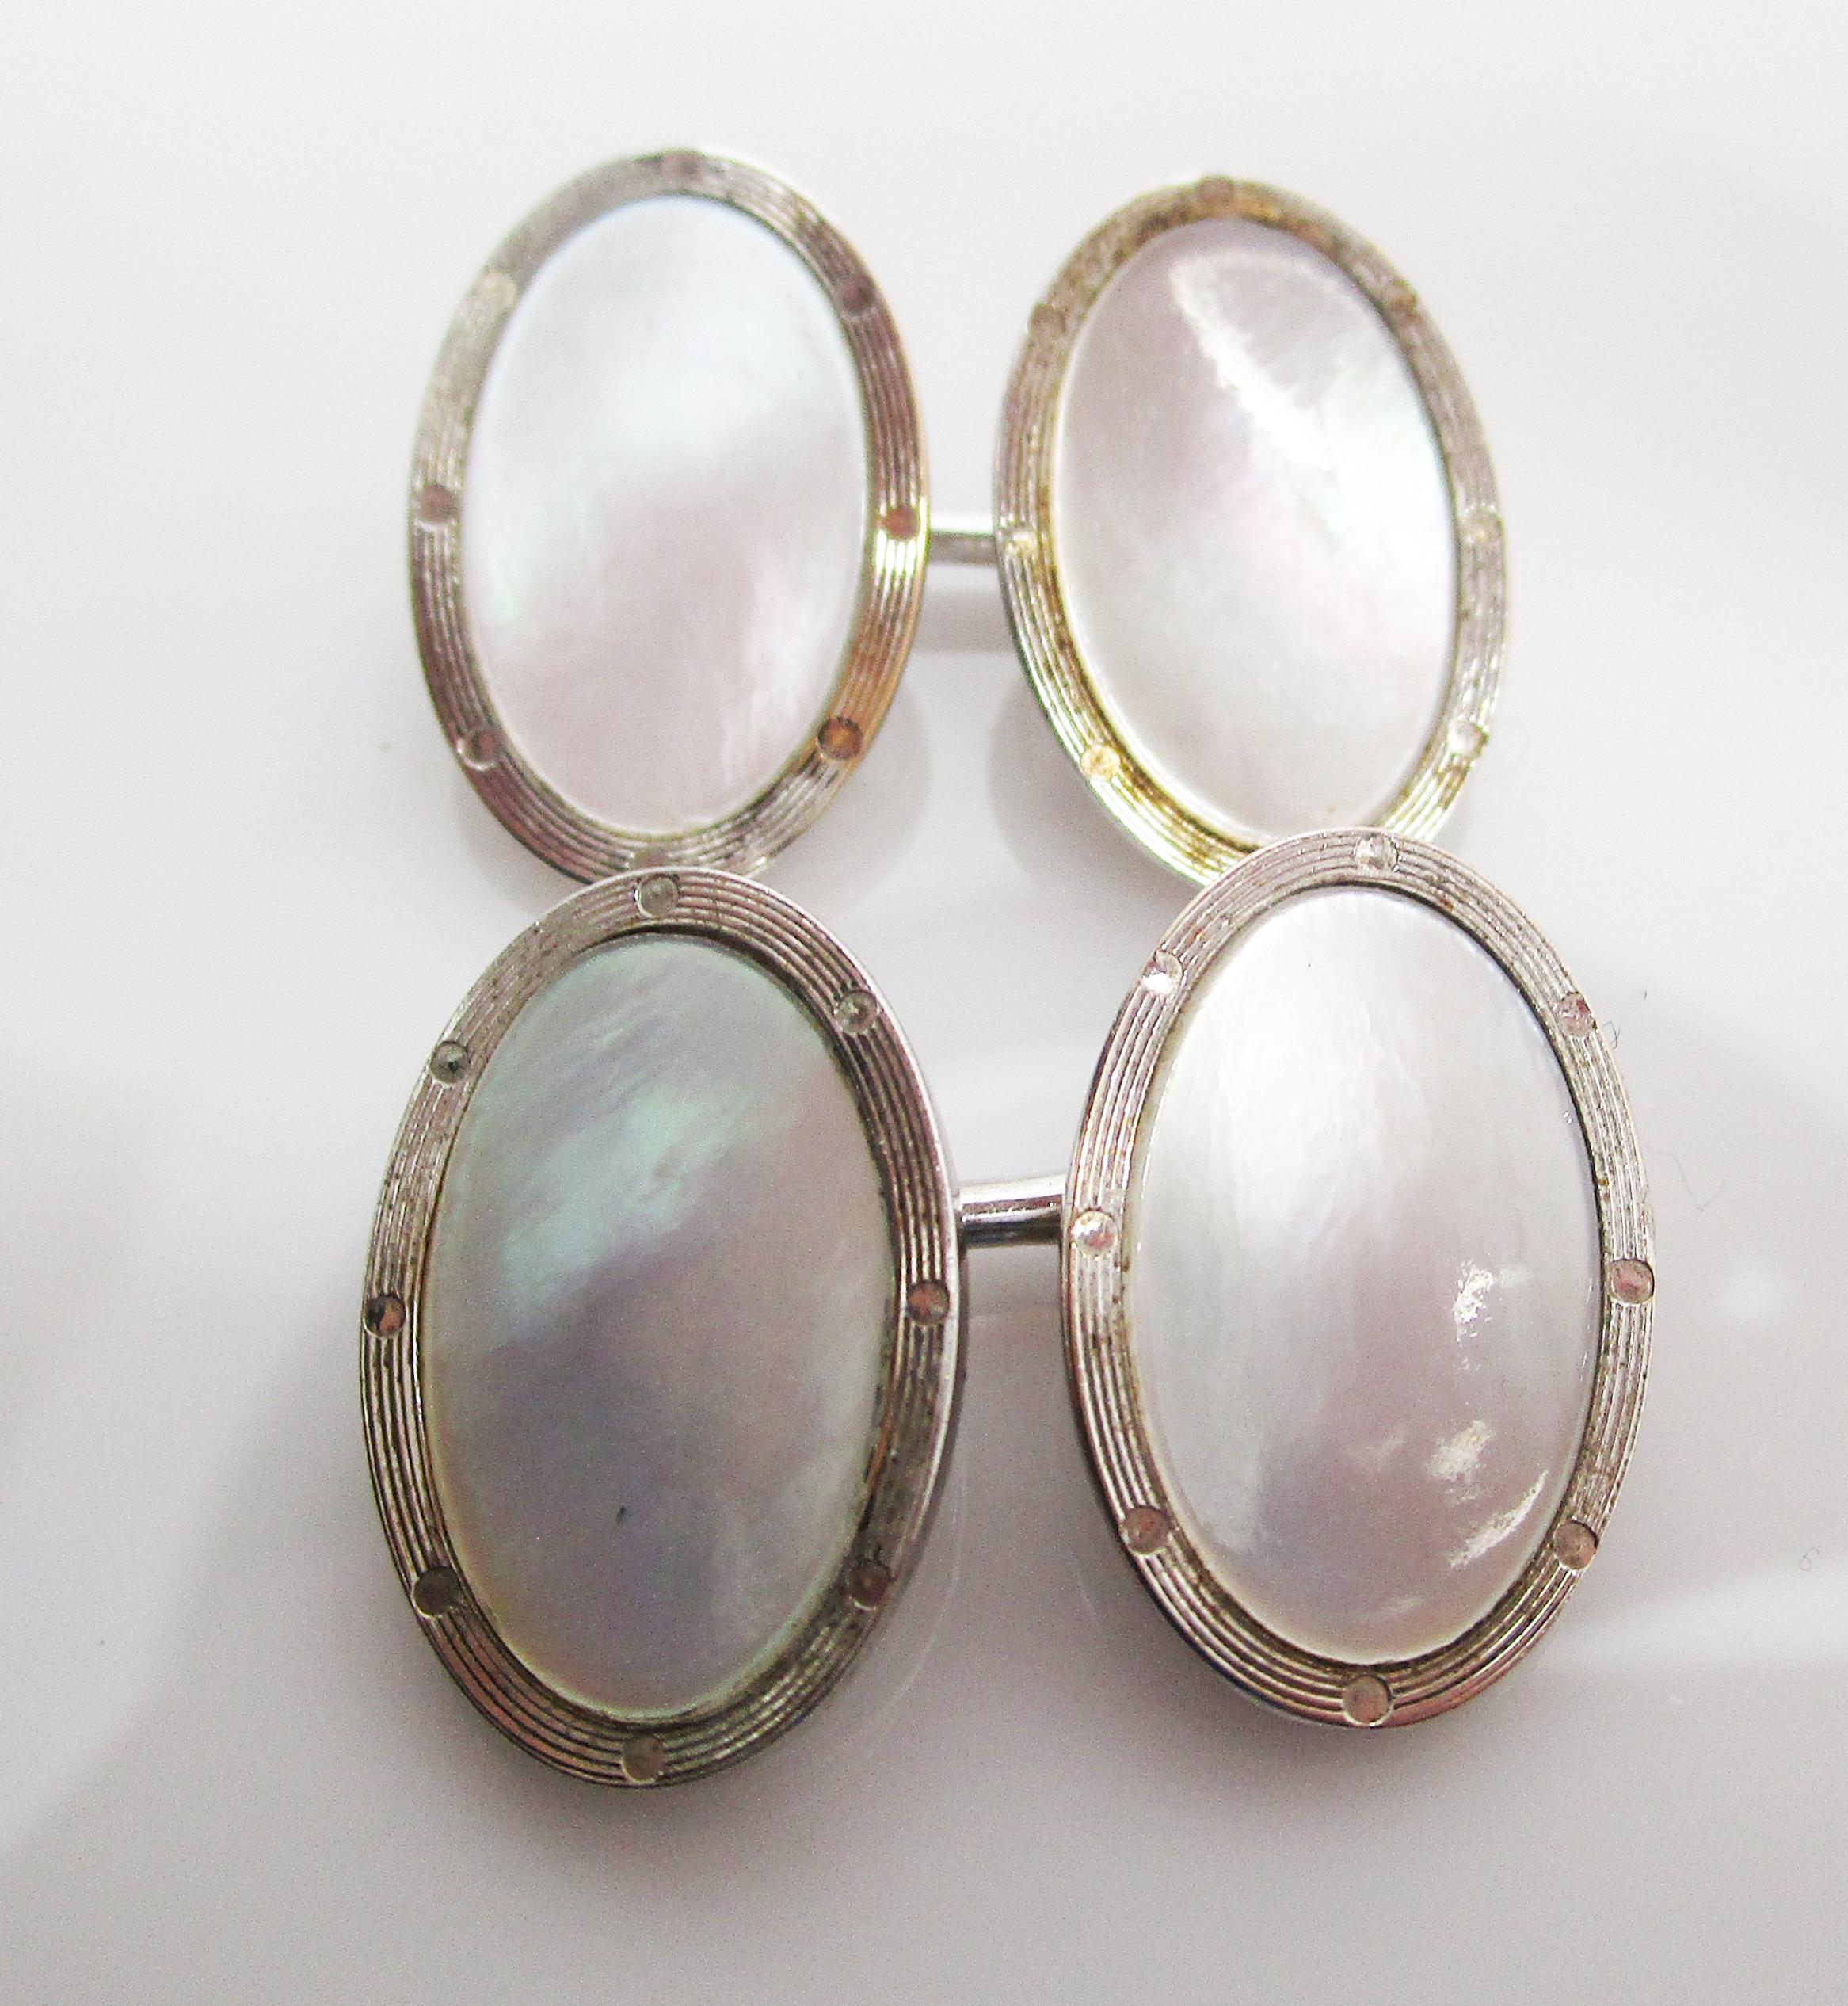 These awesome Deco cufflinks are in 14k white gold and feature elegant, iridescent mother of pearl panels! The mother of pearl panel is surrounded by a frame of engraved 14k white gold. The white on white color scheme creates an elegant,